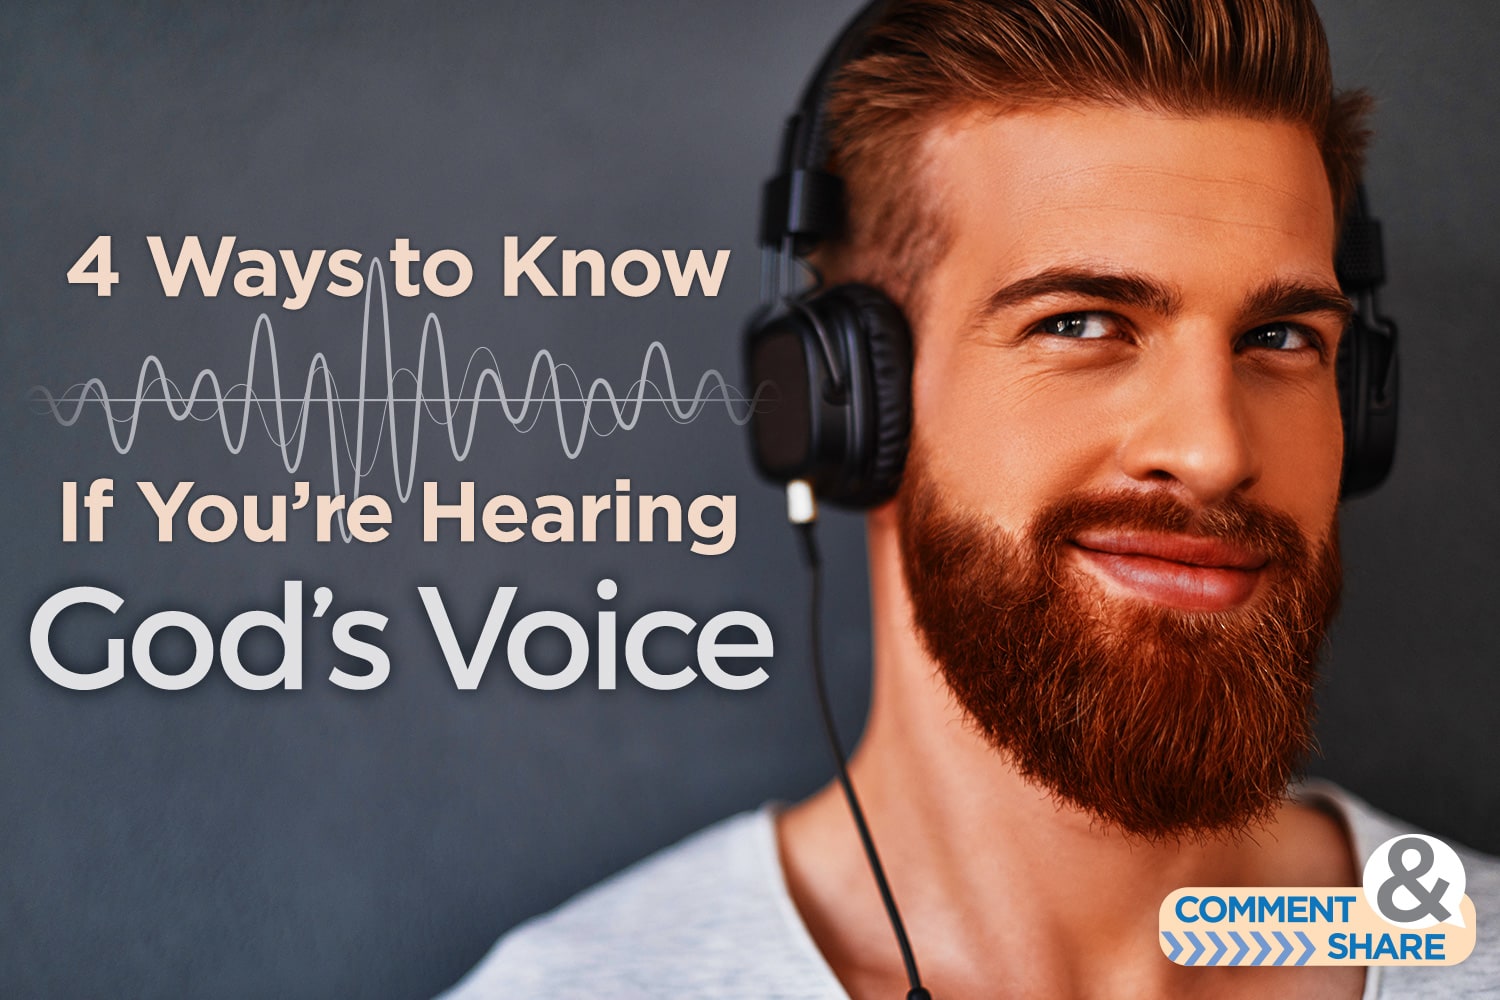 4 Ways to Know If You're Hearing God's Voice